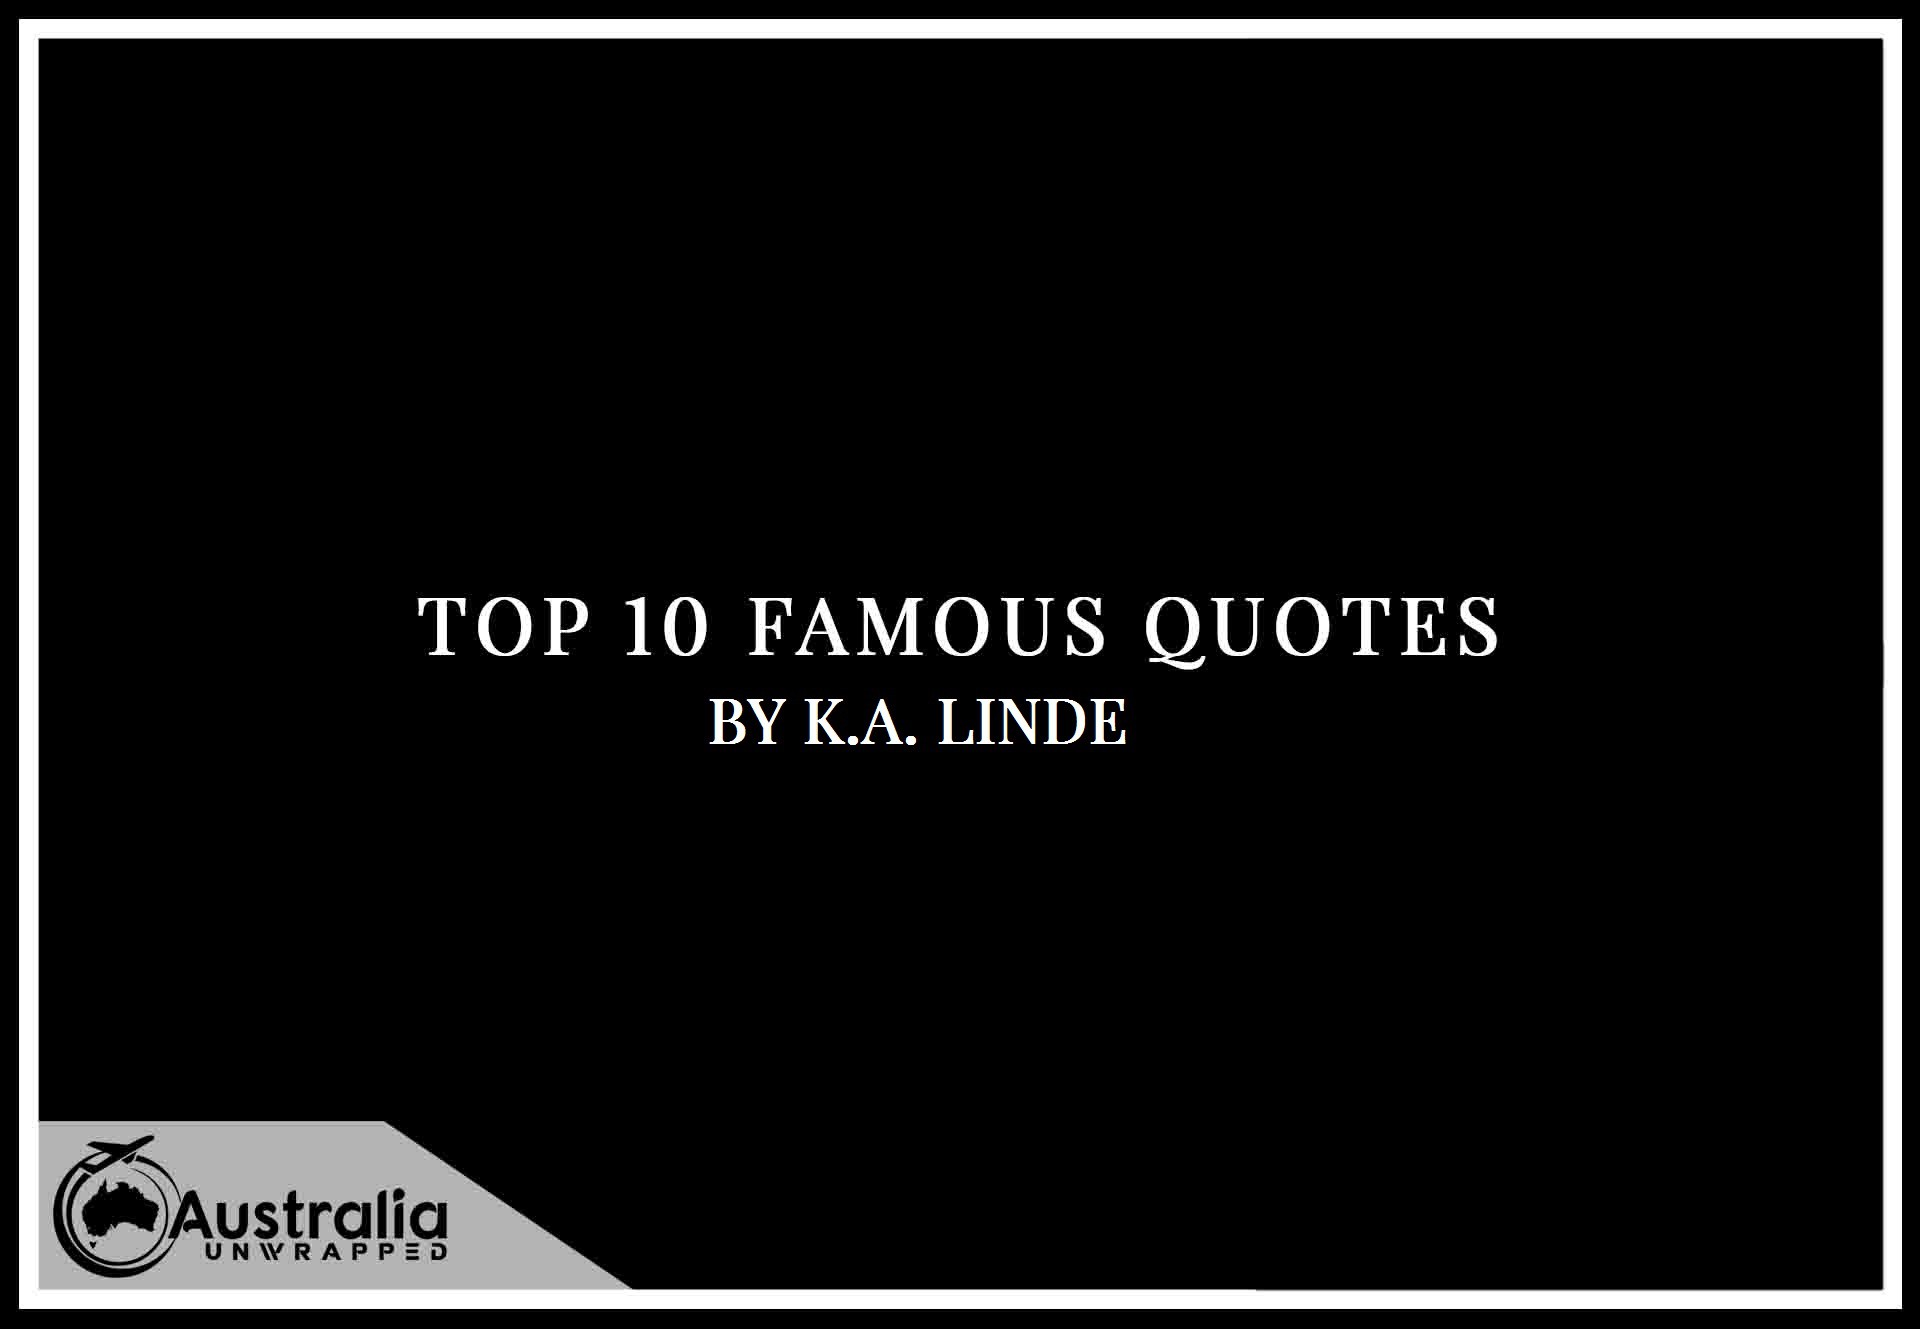 K.A. Linde’s Top 10 Popular and Famous Quotes